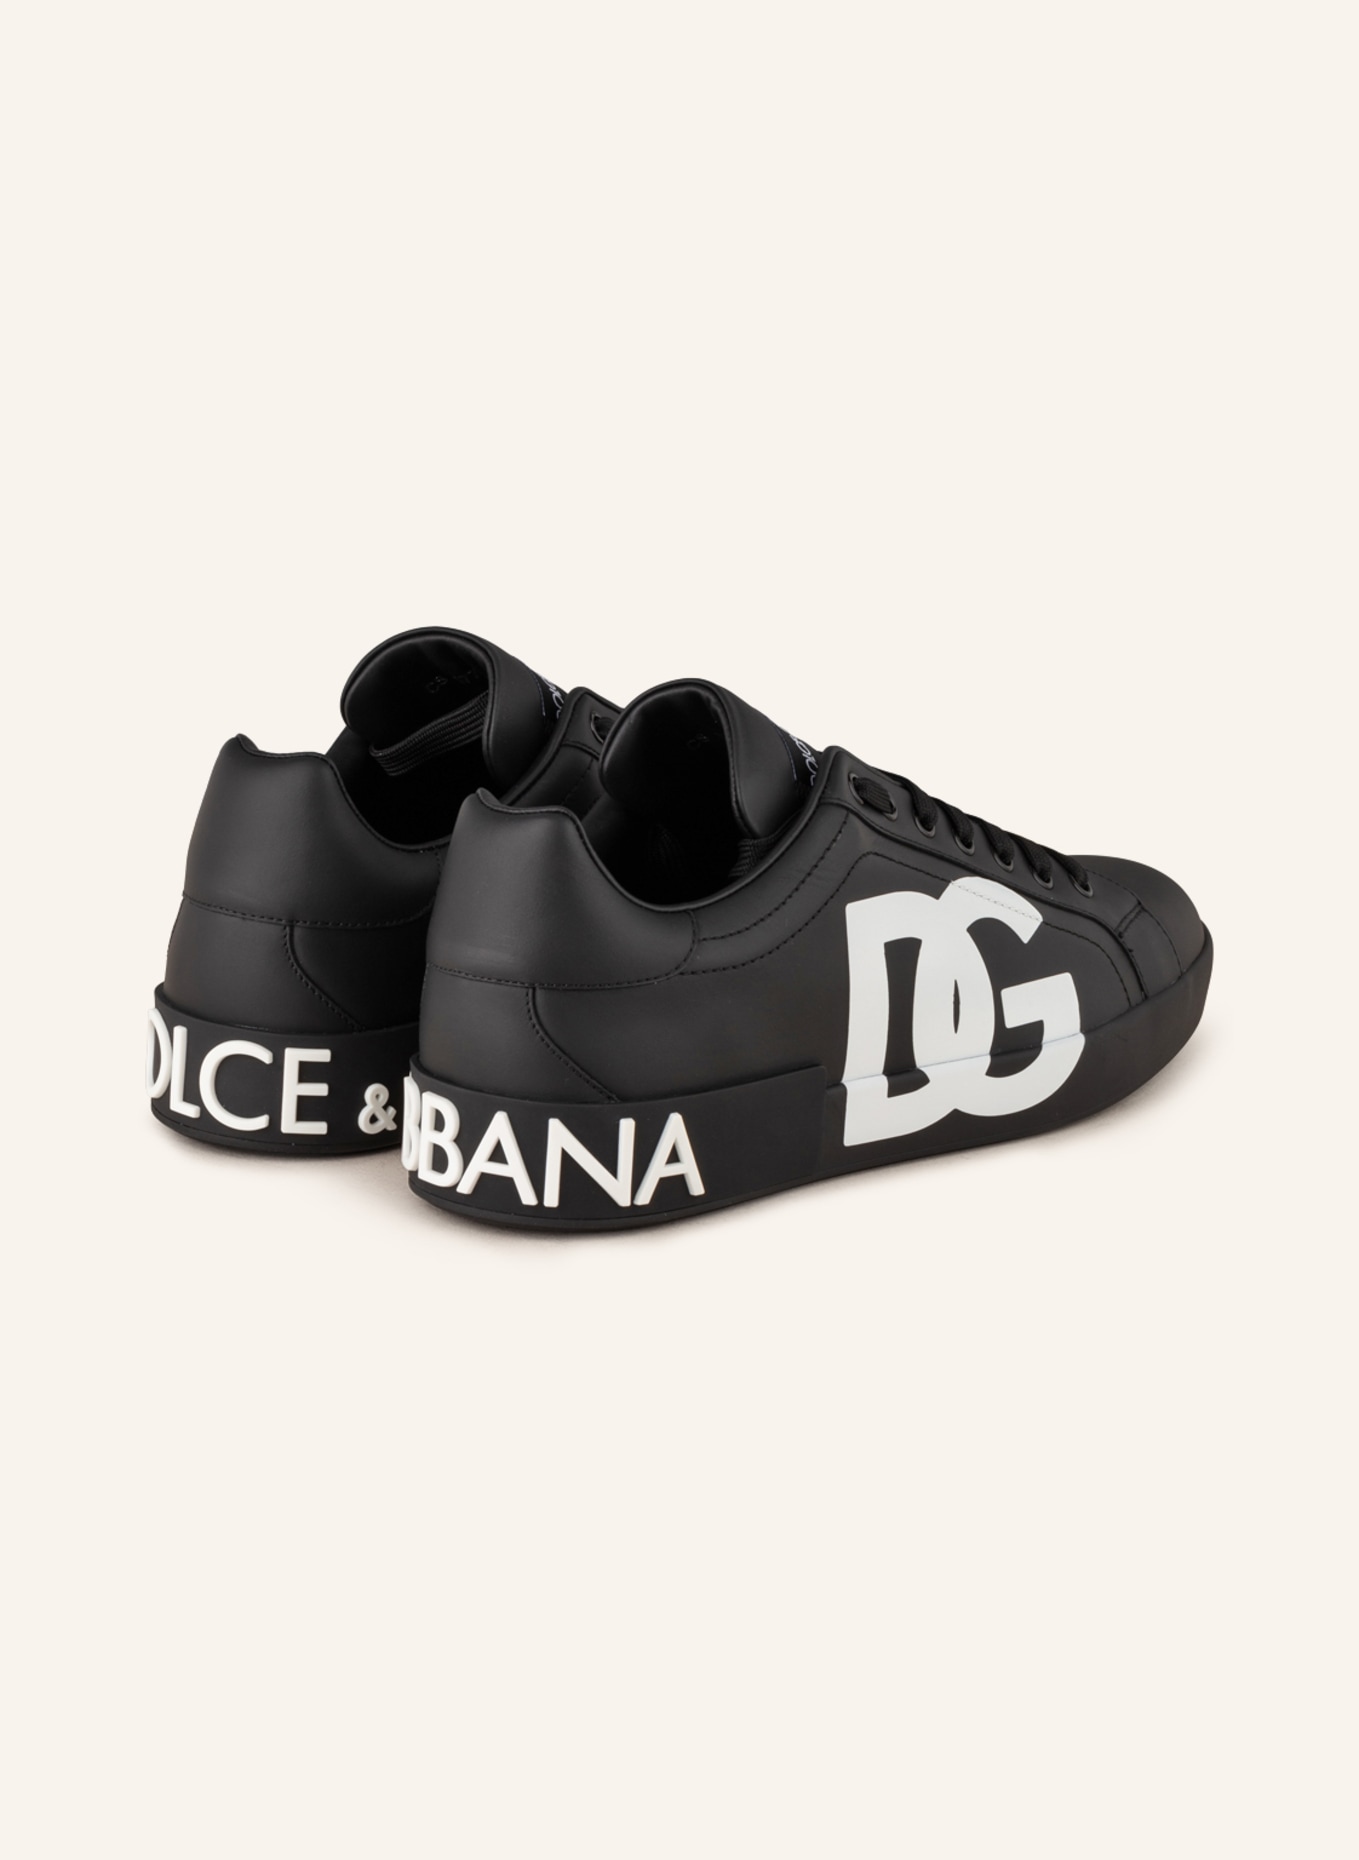 DOLCE & GABBANA SNEAKERS IN A MIX OF MATERIALS